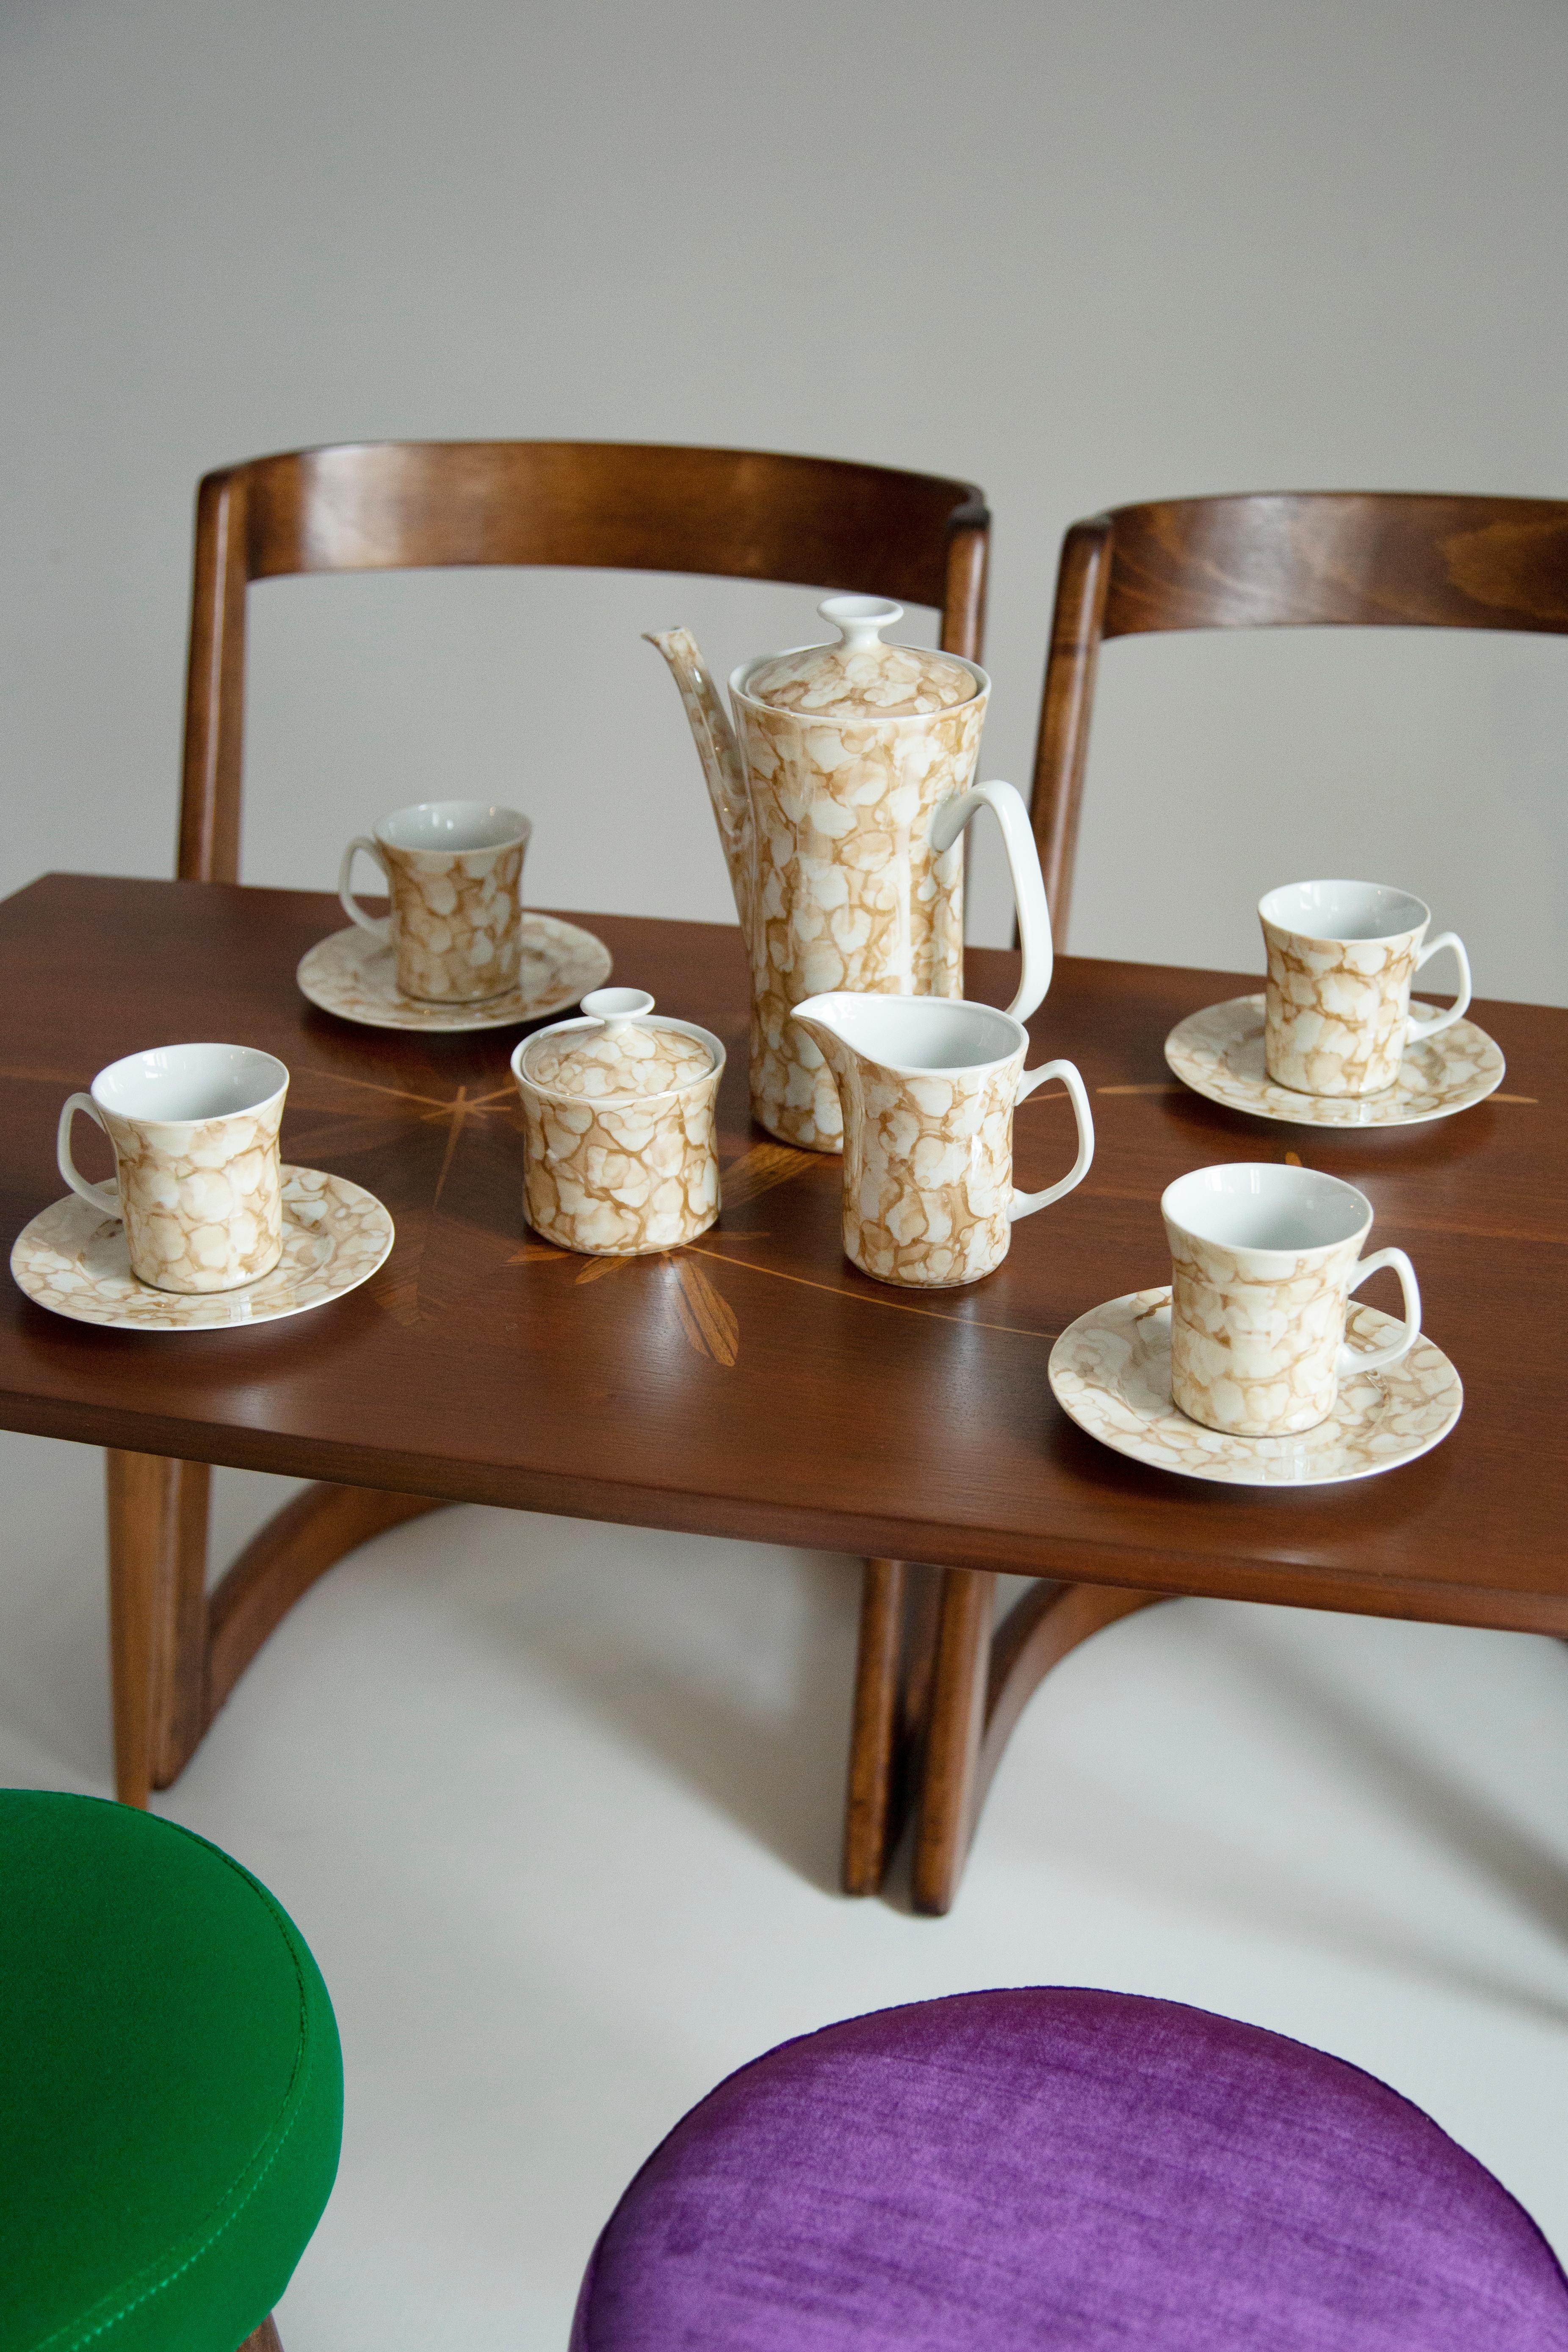 Lovely Mid-Century Modern porcelain painted marble coffee set. 

Service for 6 people produced by Zaklady Porcelany in Wloclawek in the 1960s.

The service consists of a jug, sugar bowl, creamer, 6 cups and 4 saucers. 
Two plates are